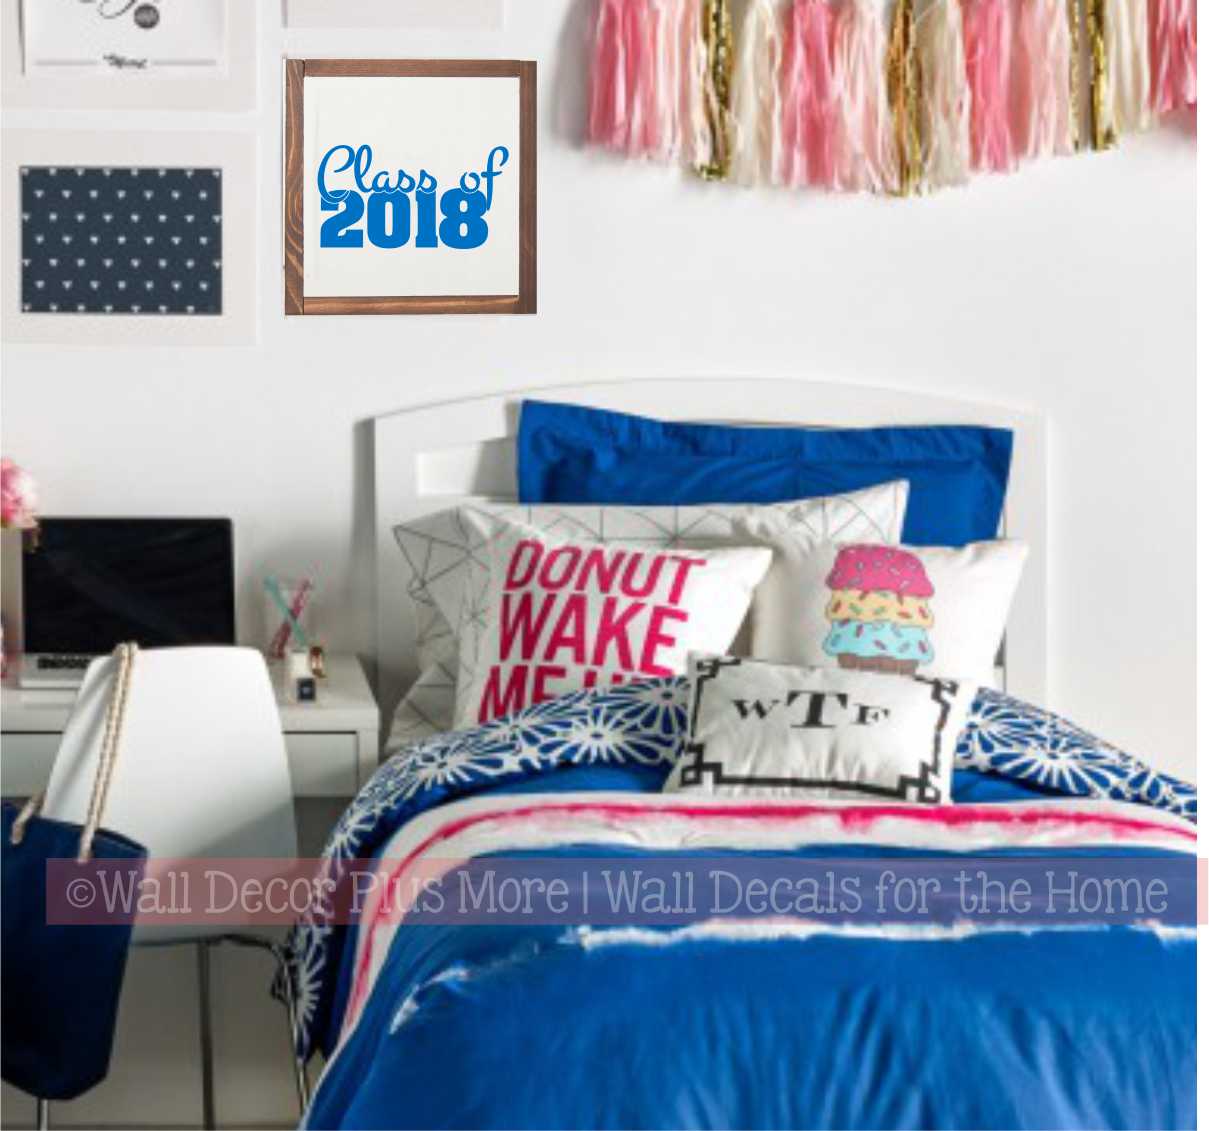 Help the new grad decorate their new dorm room! Wall decal stickers are easy to apply and remove when the time comes. 